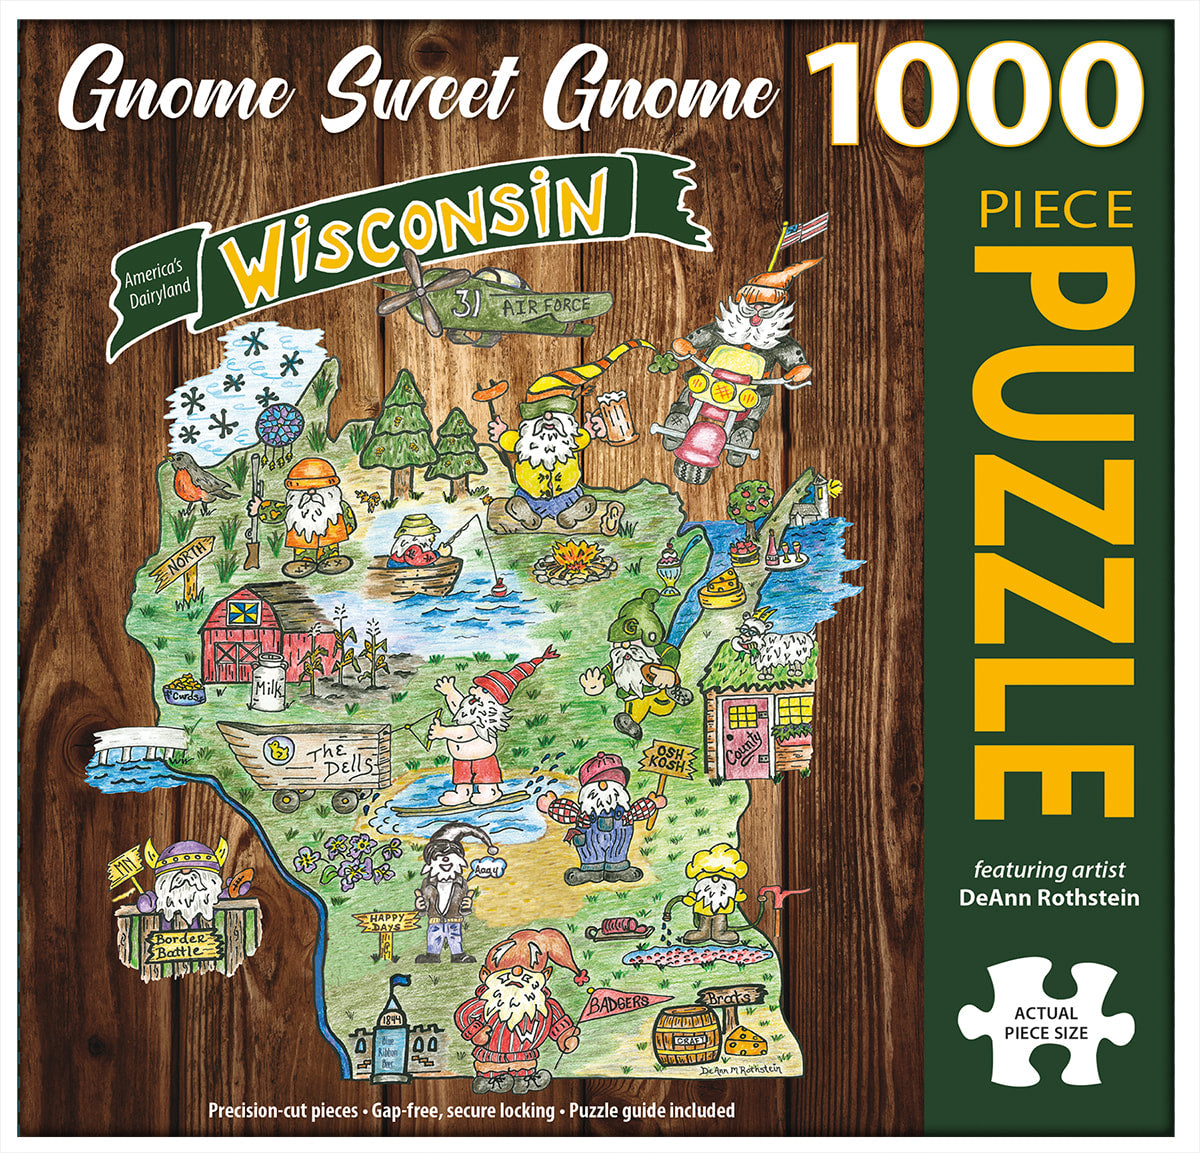 Gnome Sweet Gnome Wisconsin Puzzle